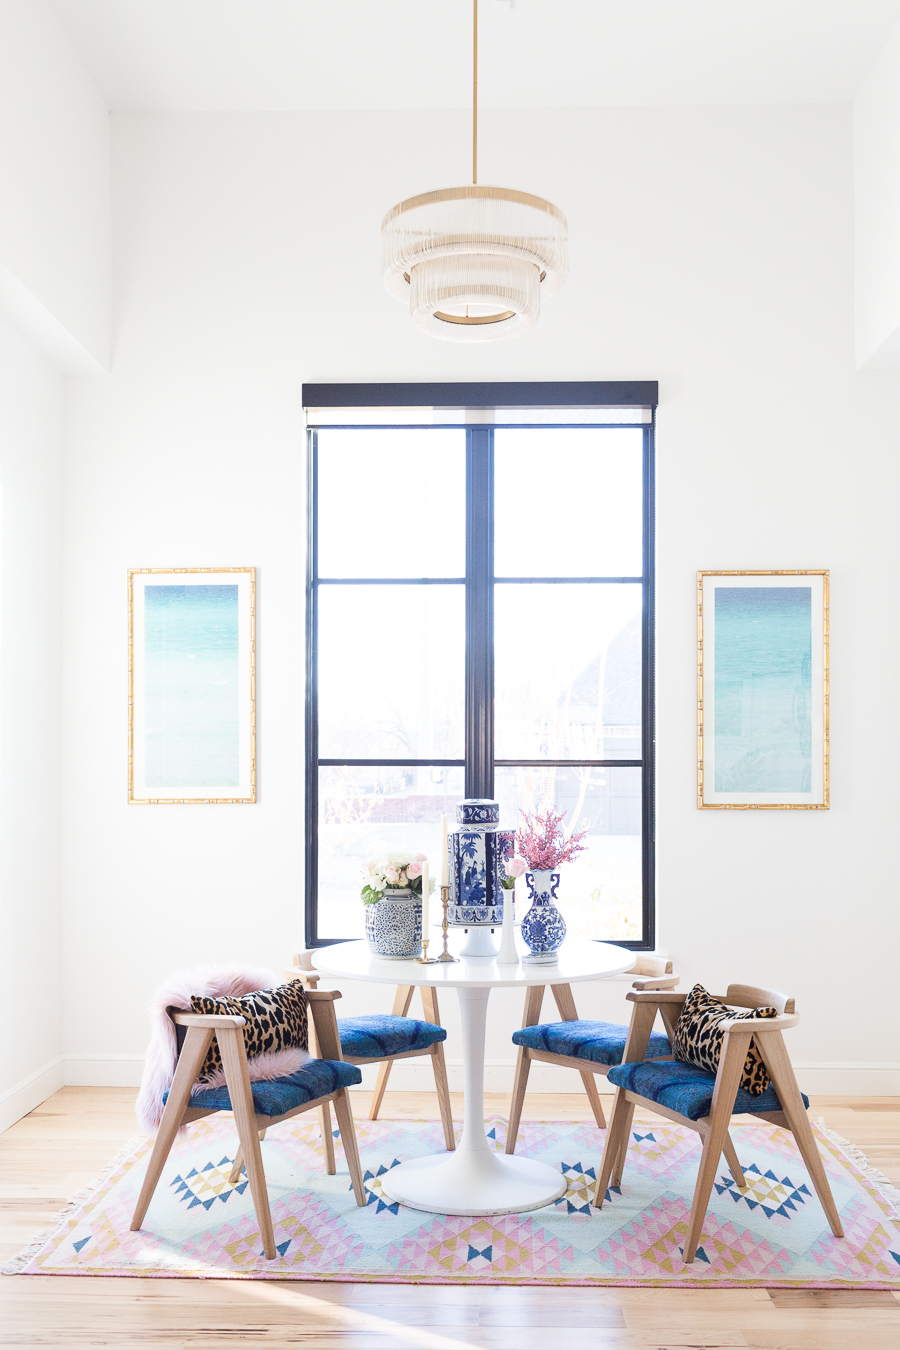 Rooms We Love Home Tour Navy and Pink Modern Glam Breakfast Nook Glittler Guide elodie rug blue and white tabletop vases gold candlesticks black windows wishbone chairs white round table colorful dining room rugs-3.jpg-1.jpg